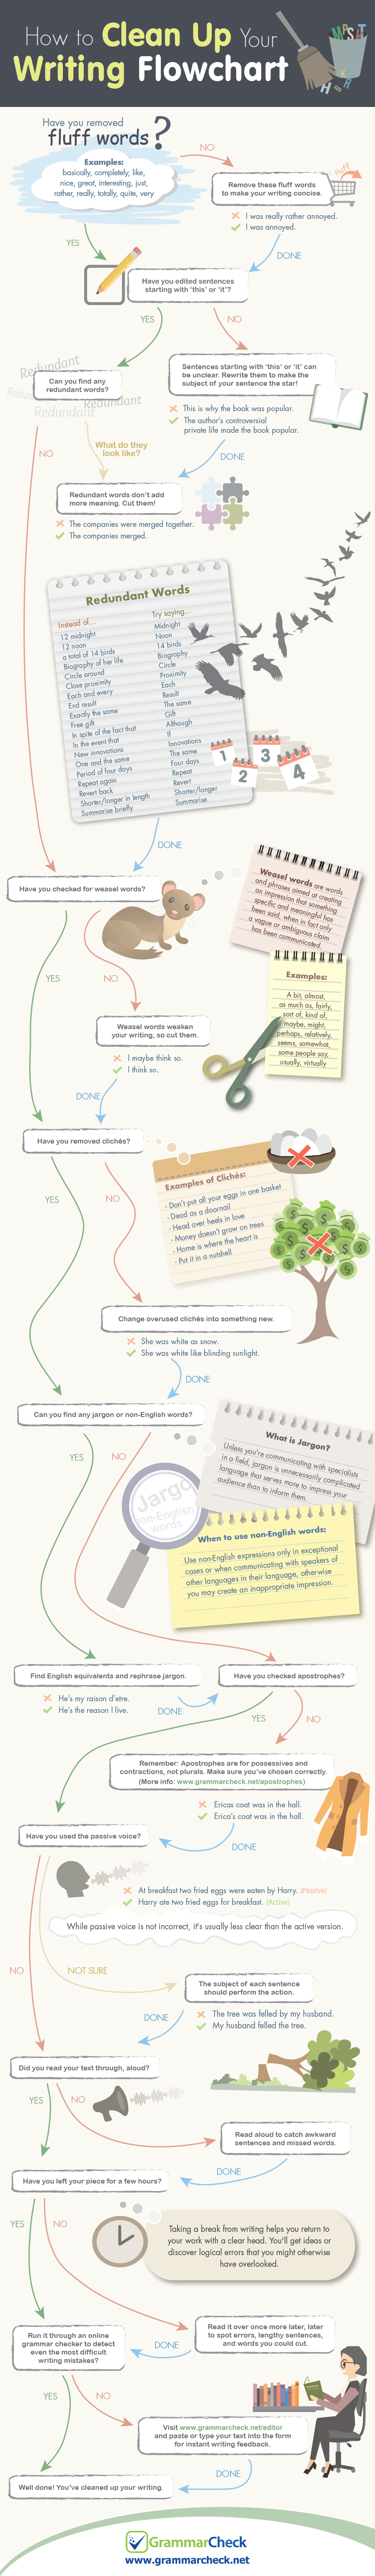 How to Clean Up Your Writing - Flowchart (Infographic)